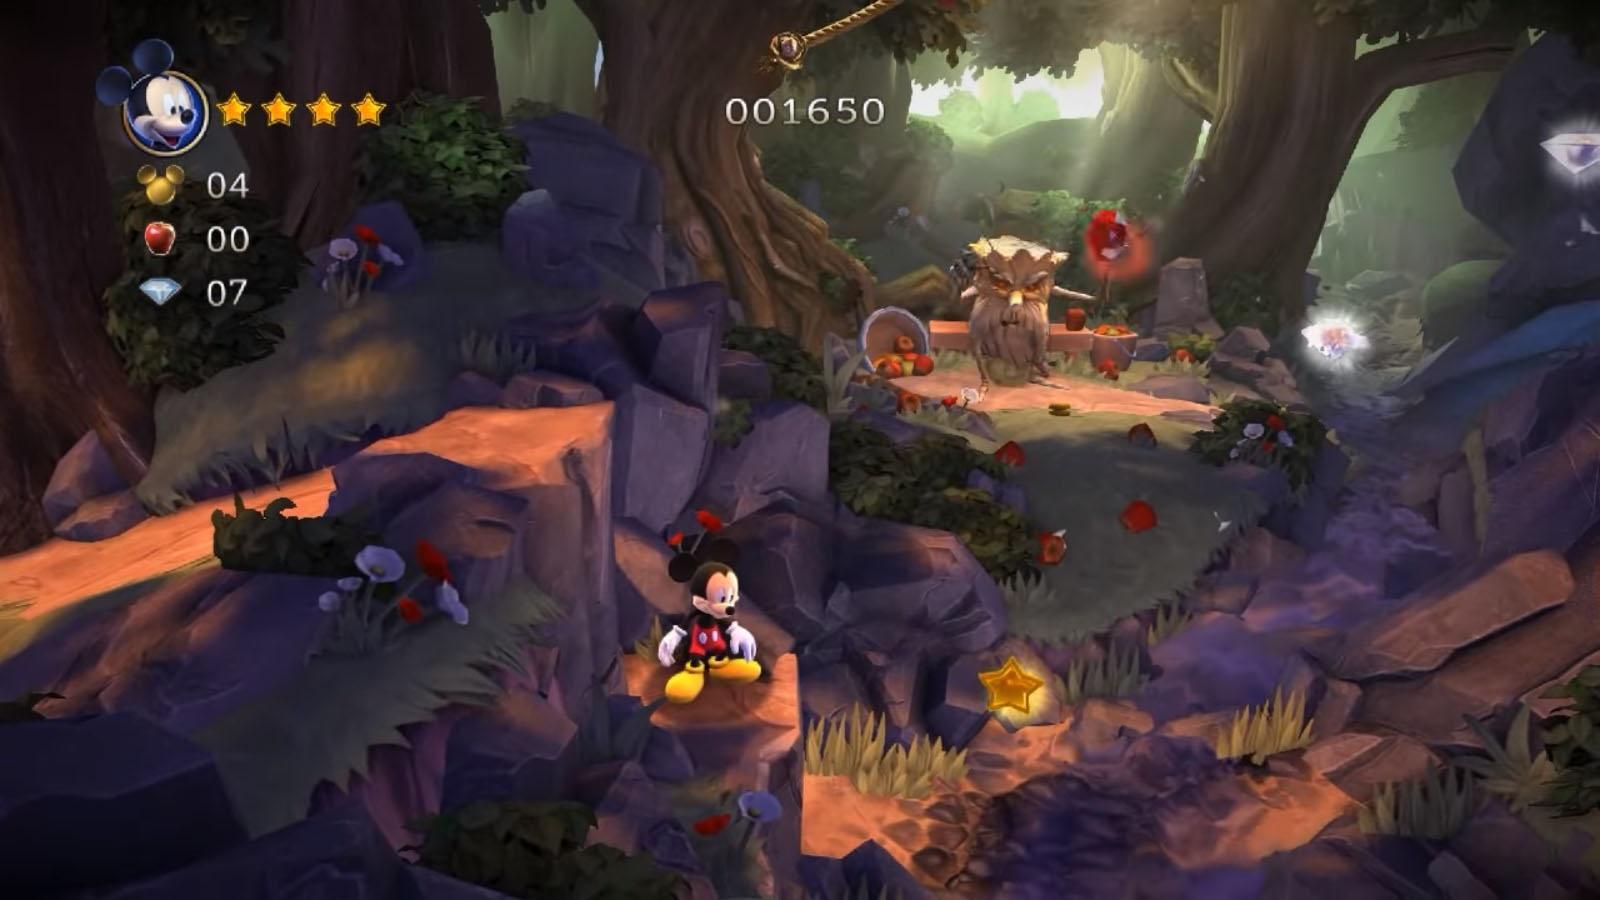 Tips Castle Of Illusion for Android - APK Download